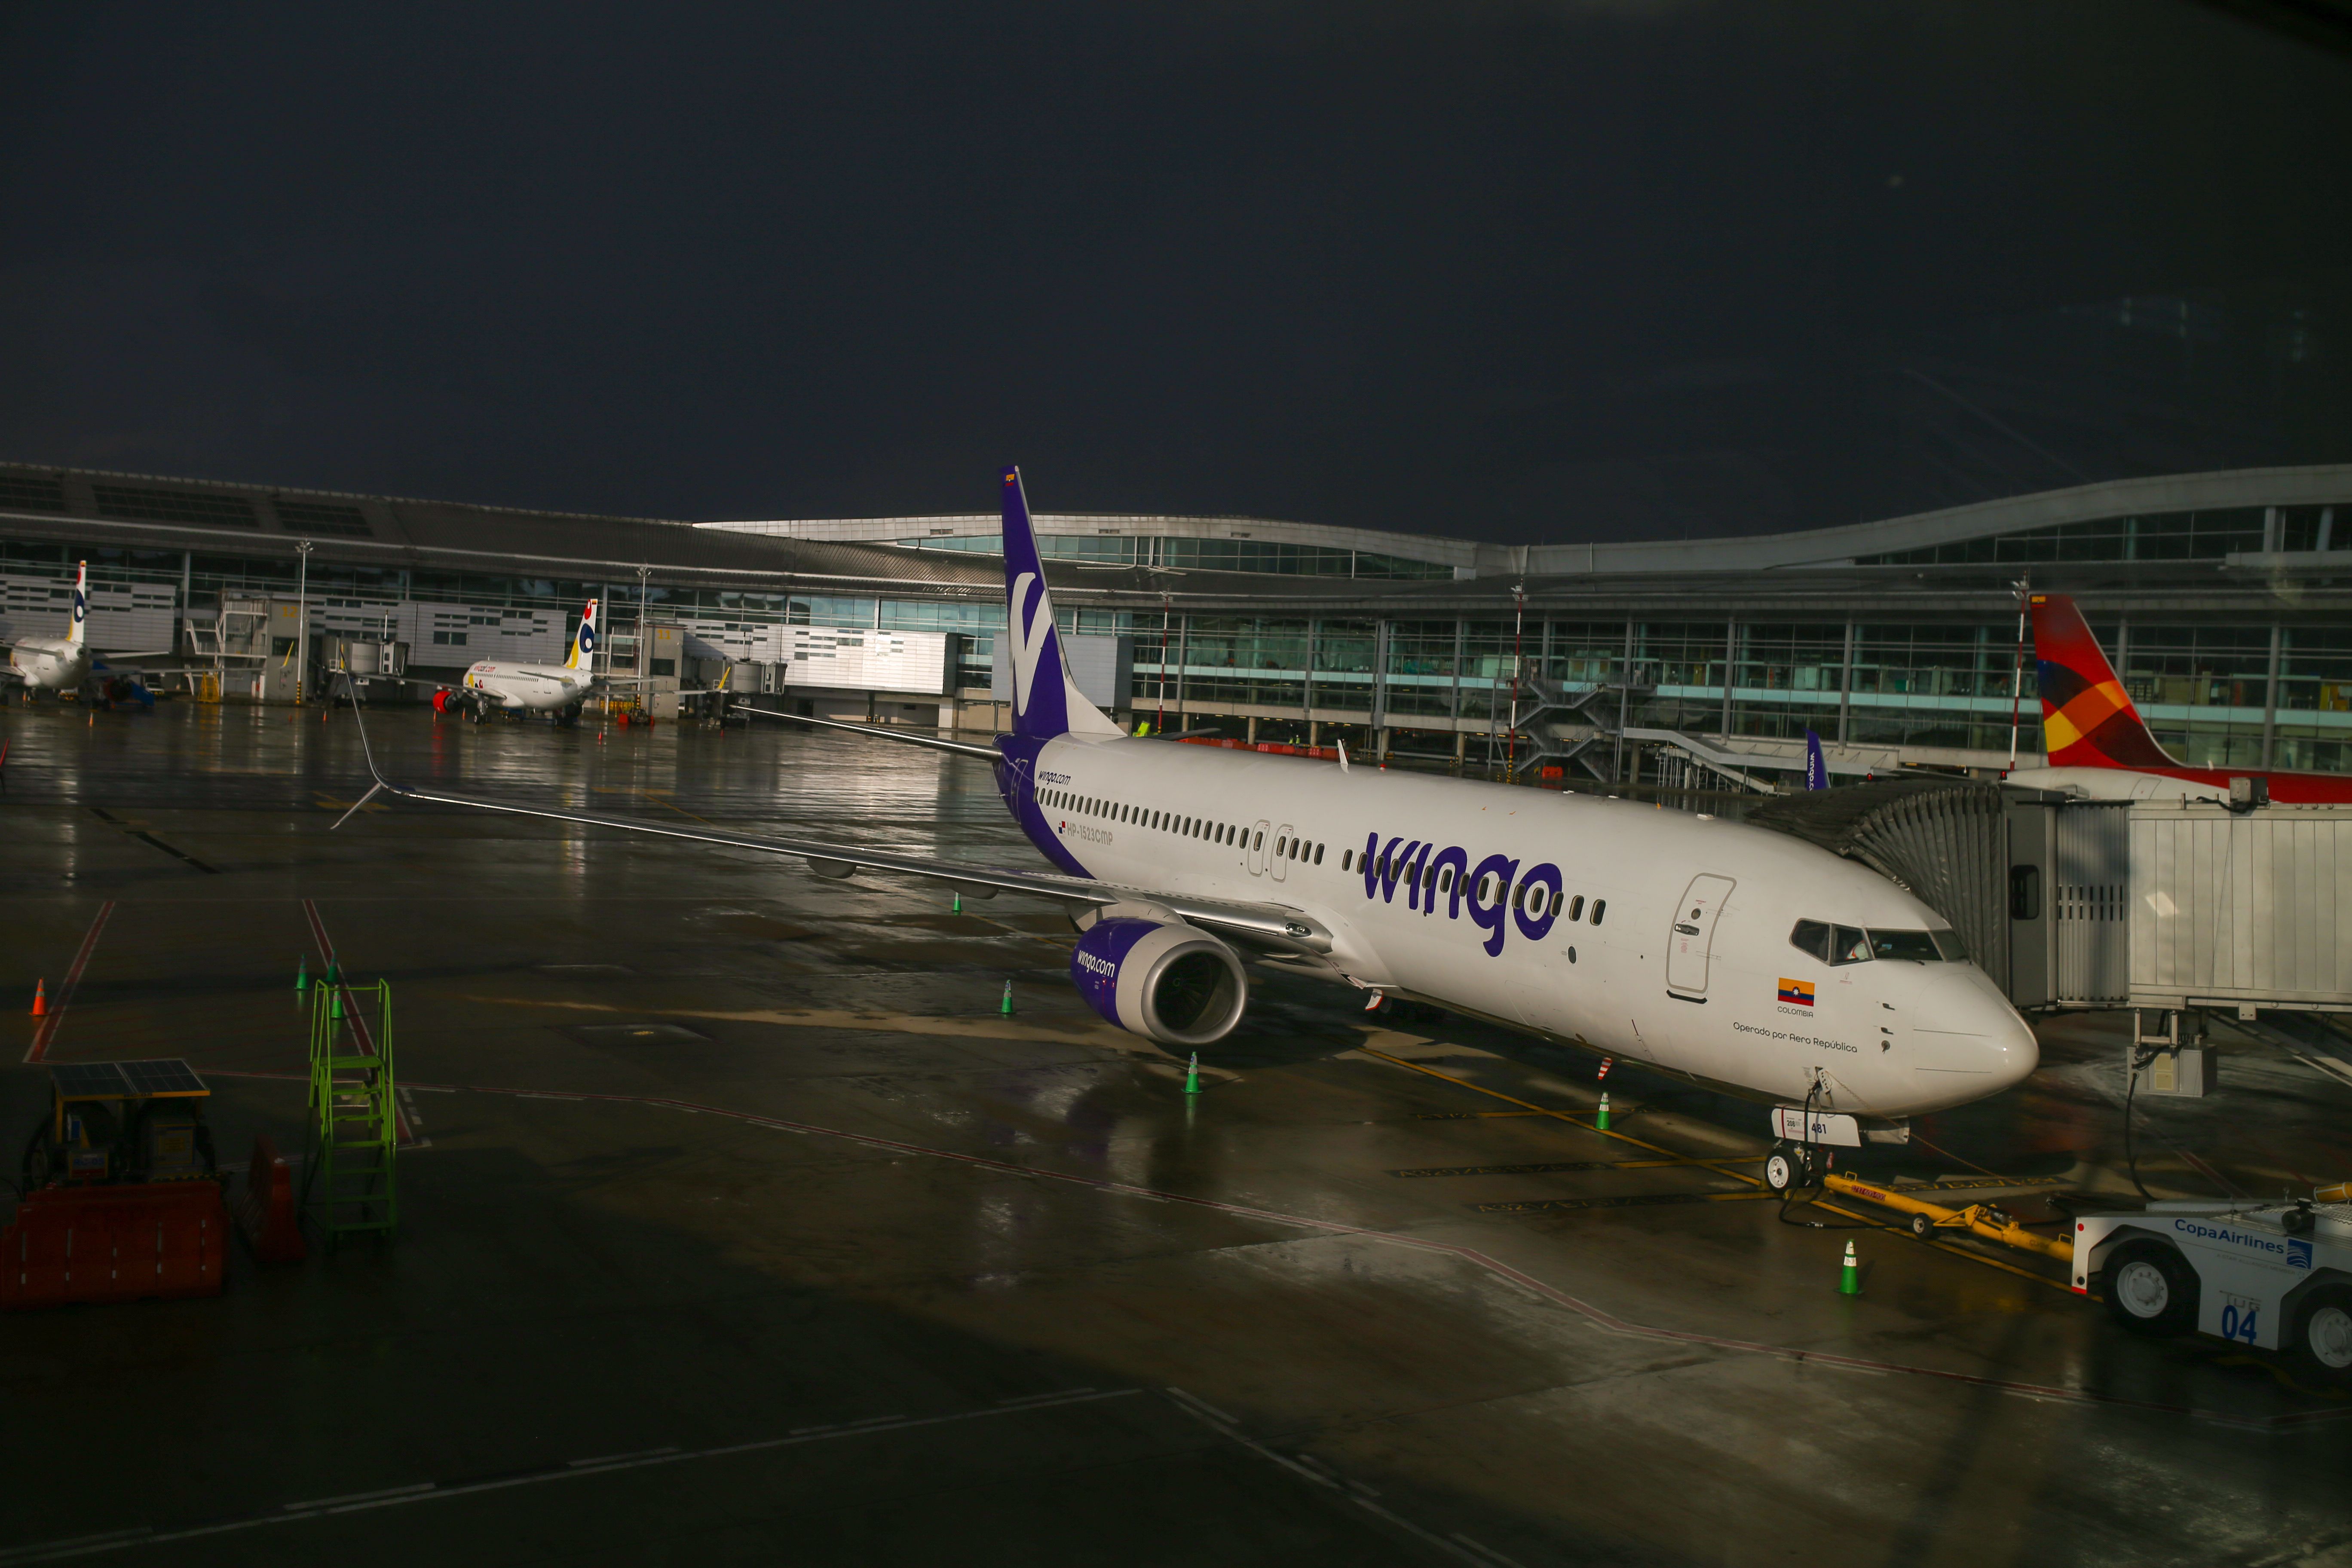  A Wingo airline plane sits on the tarmac at El Dorado International Airport in Bogota, Colombia